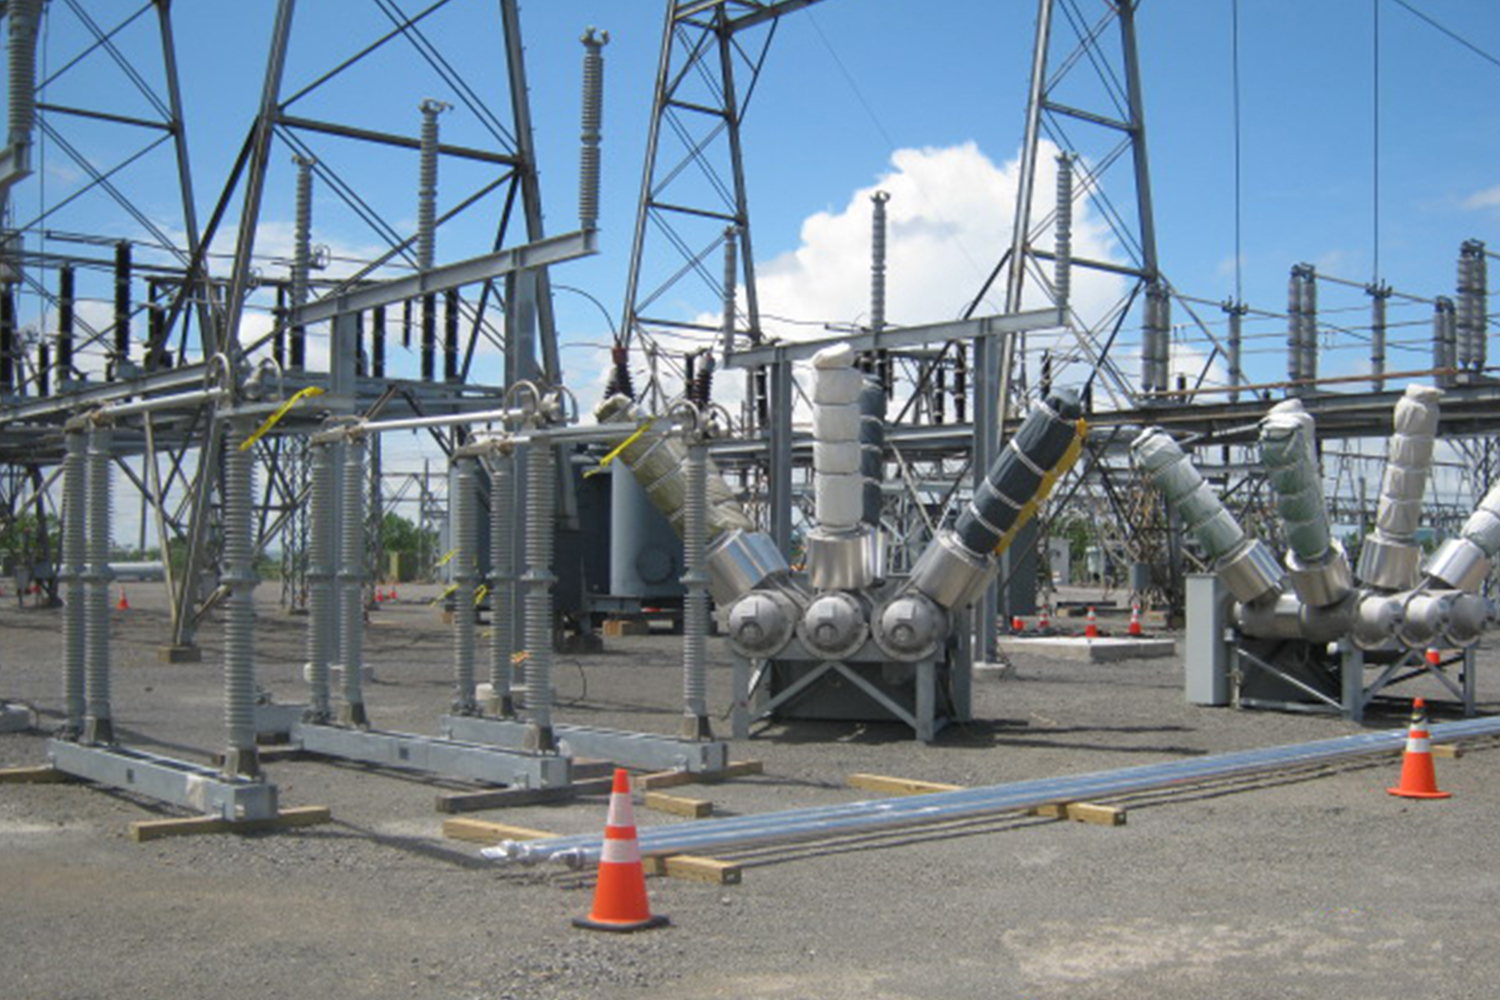 aldridge-electric-top-best-specialty-contractors-substation-electrical-transmission-distribution-construction-projects.jpg